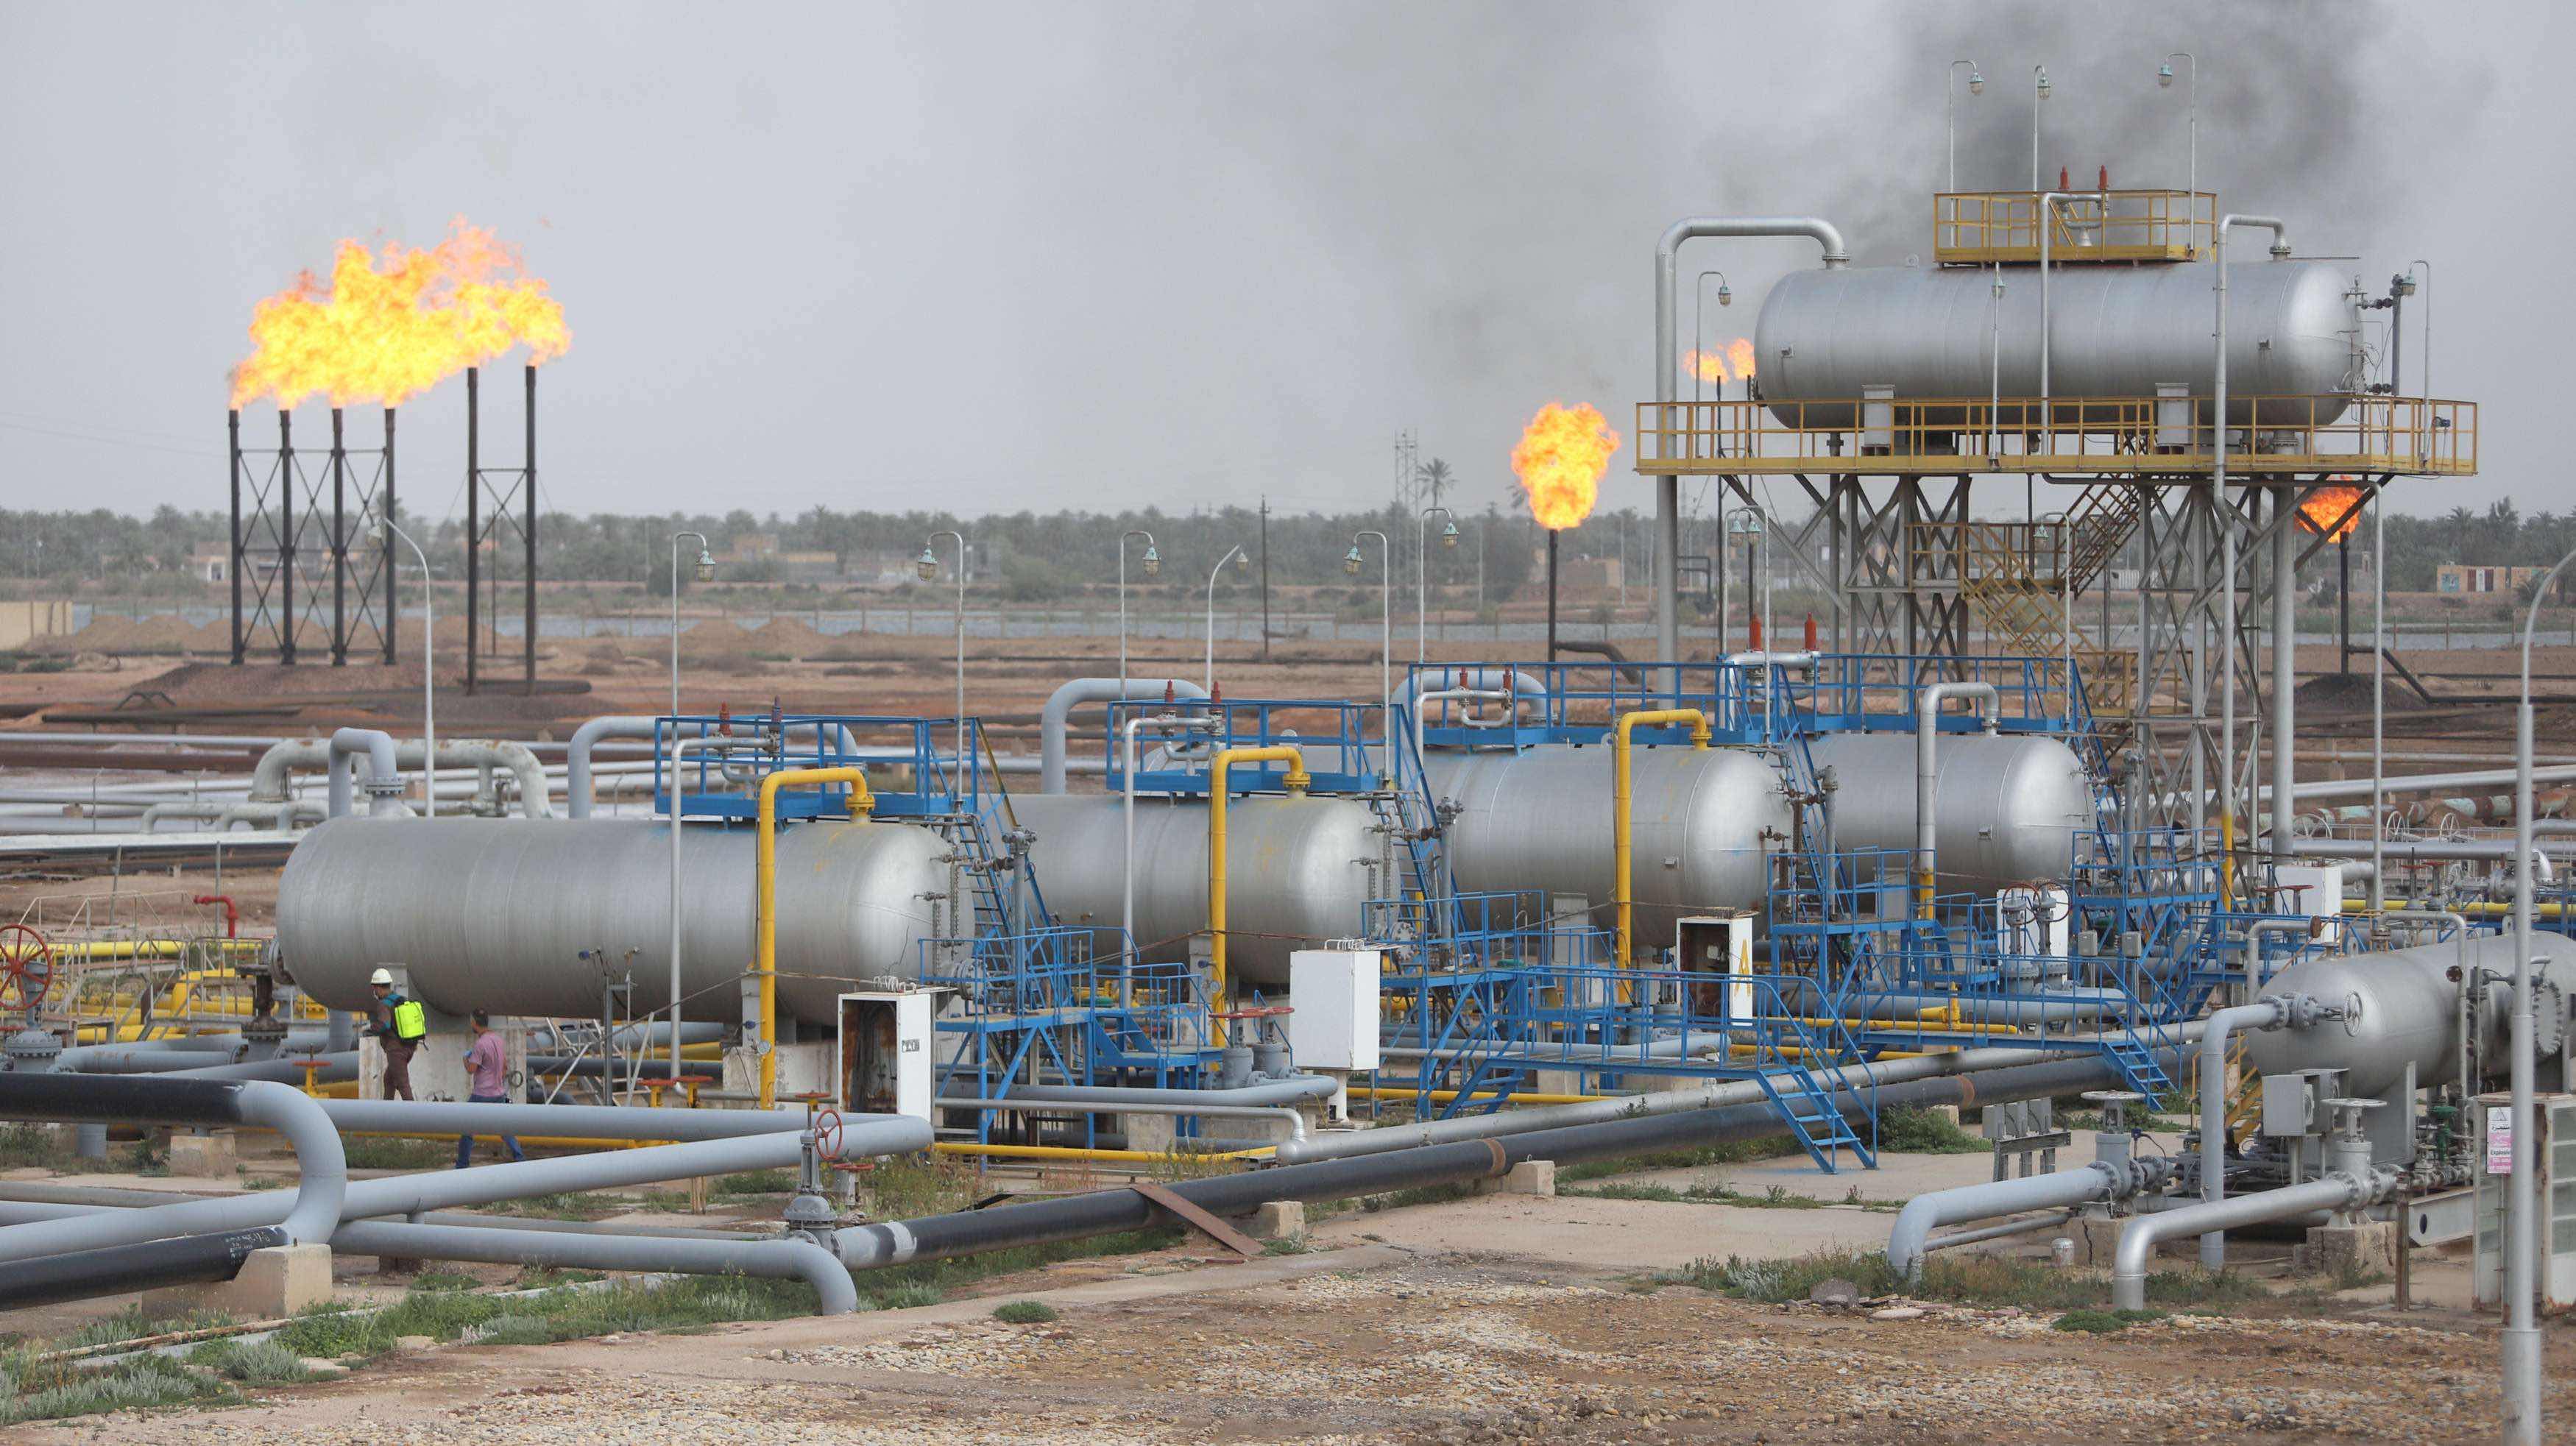 Iraq is the second-biggest crude producer in the OPEC oil cartel